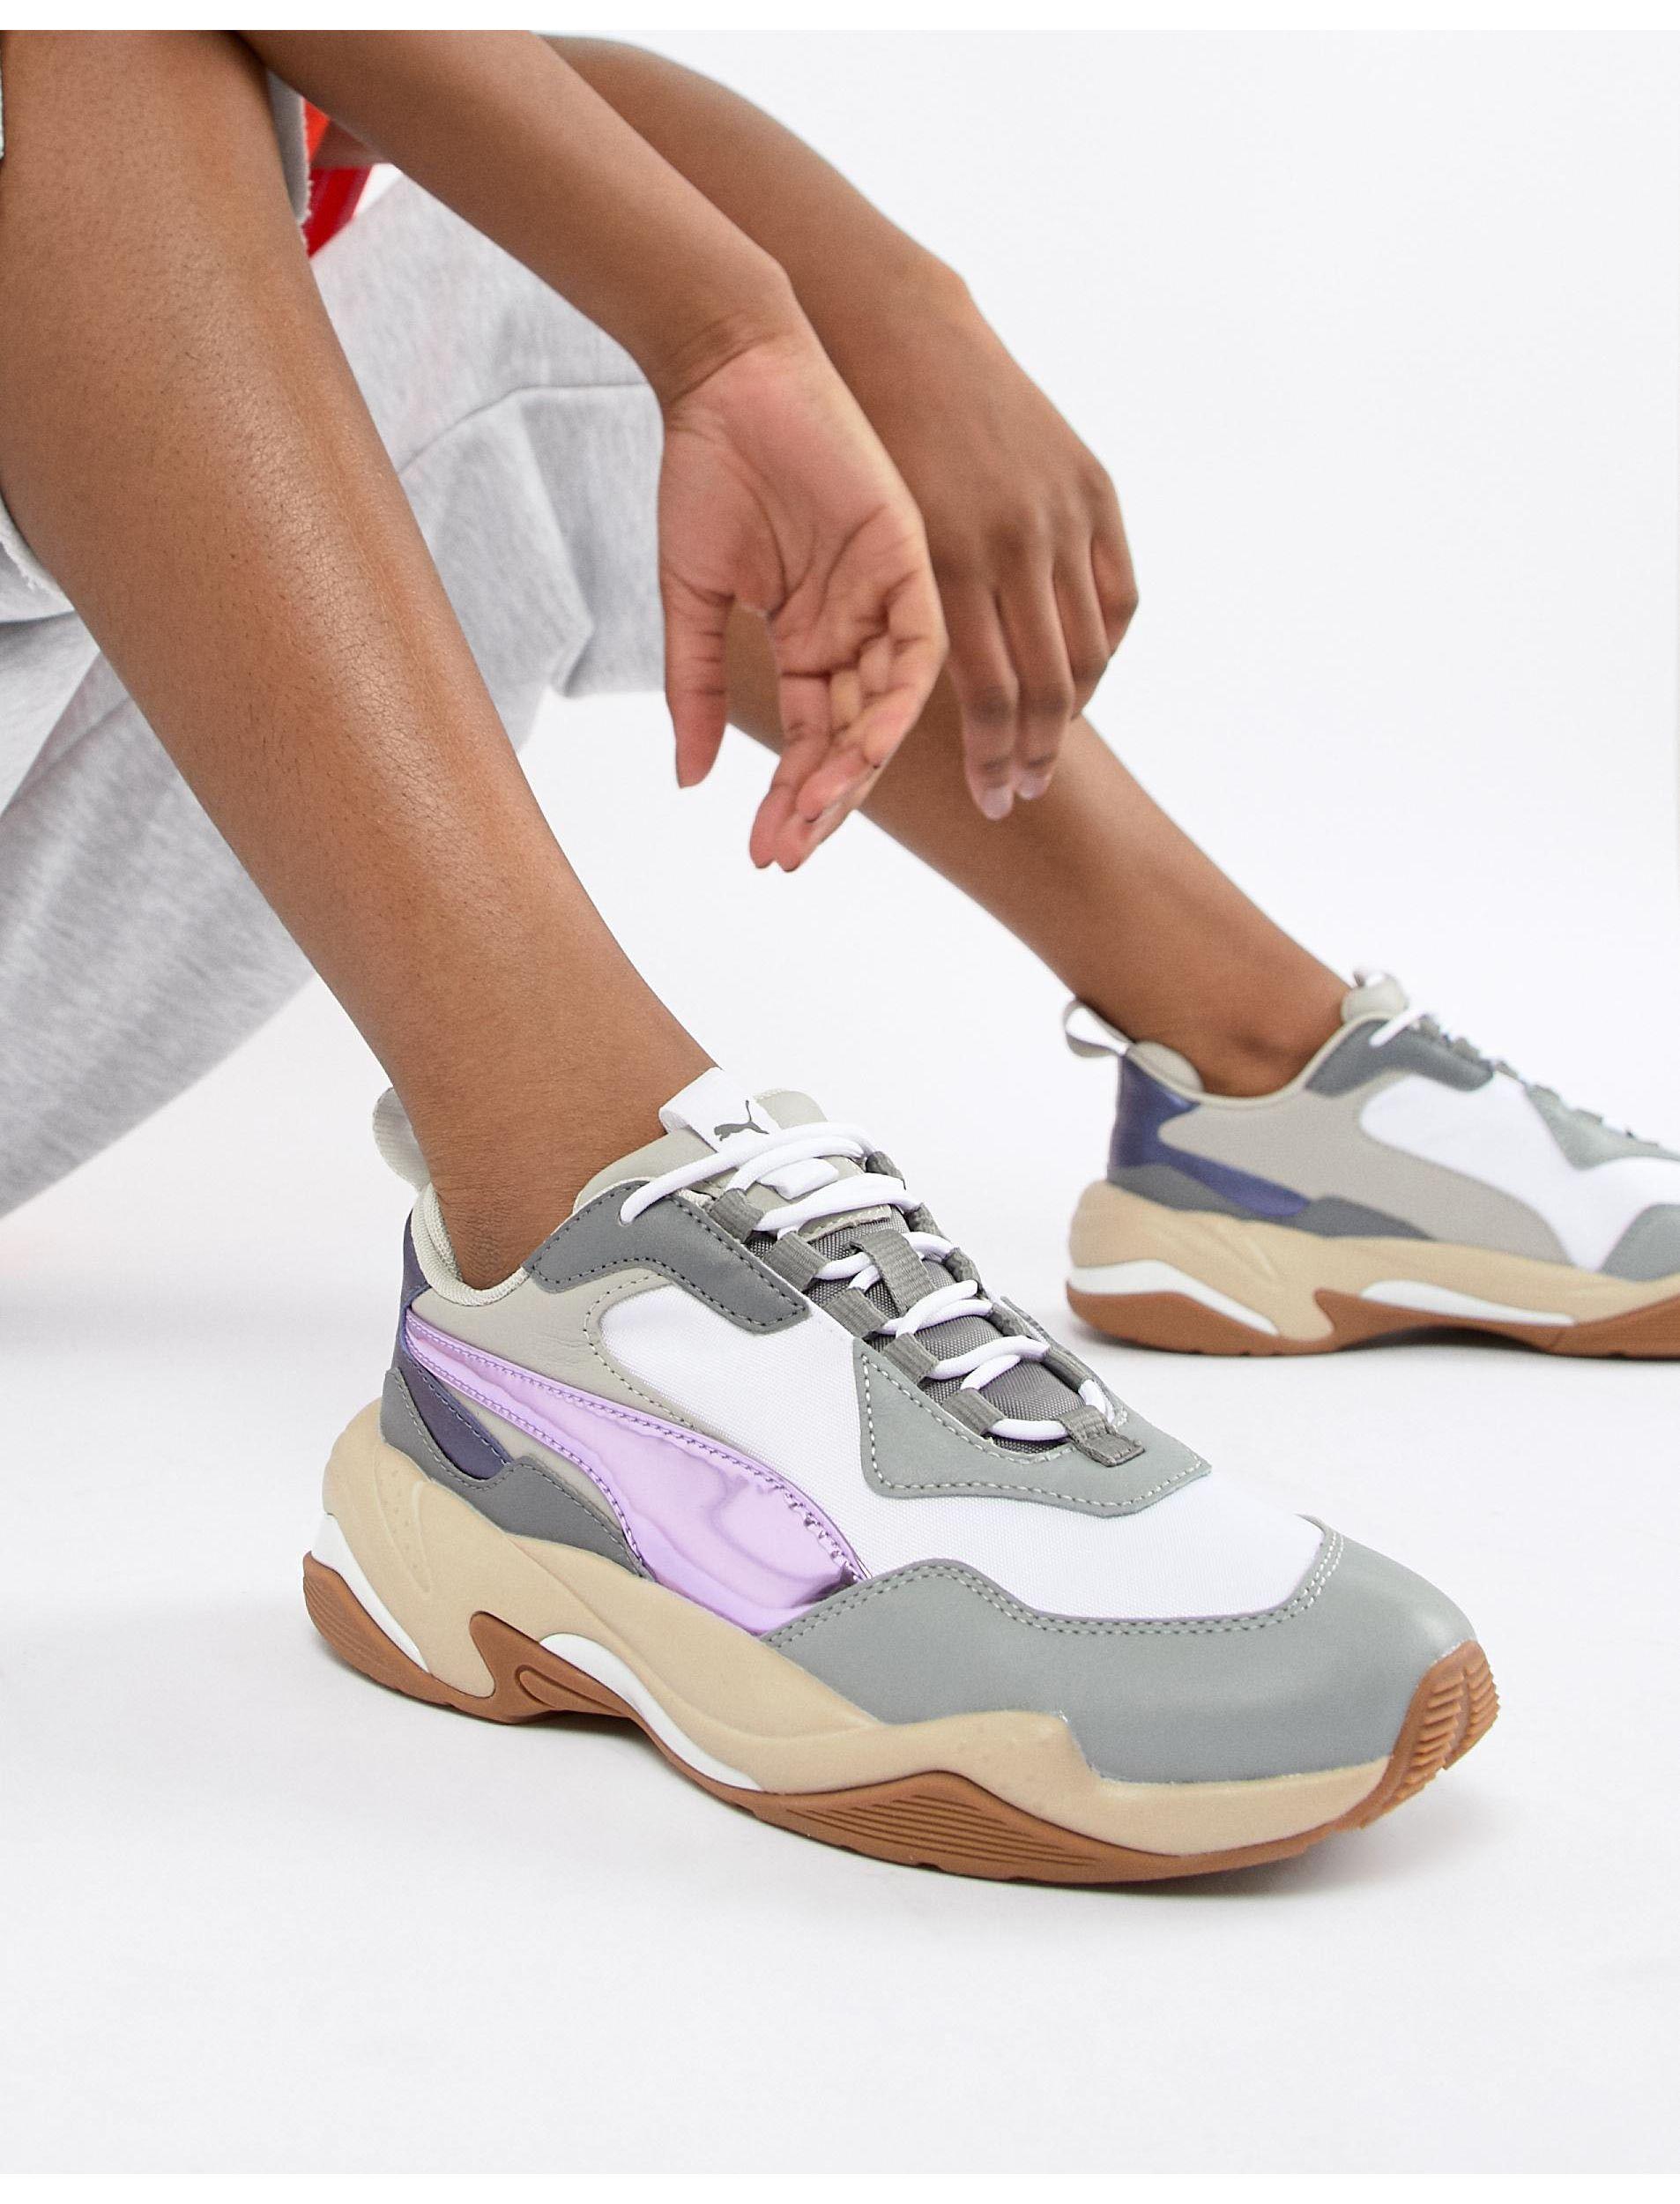 PUMA Leather Thunder Electric Lavender Sneakers in Purple - Lyst